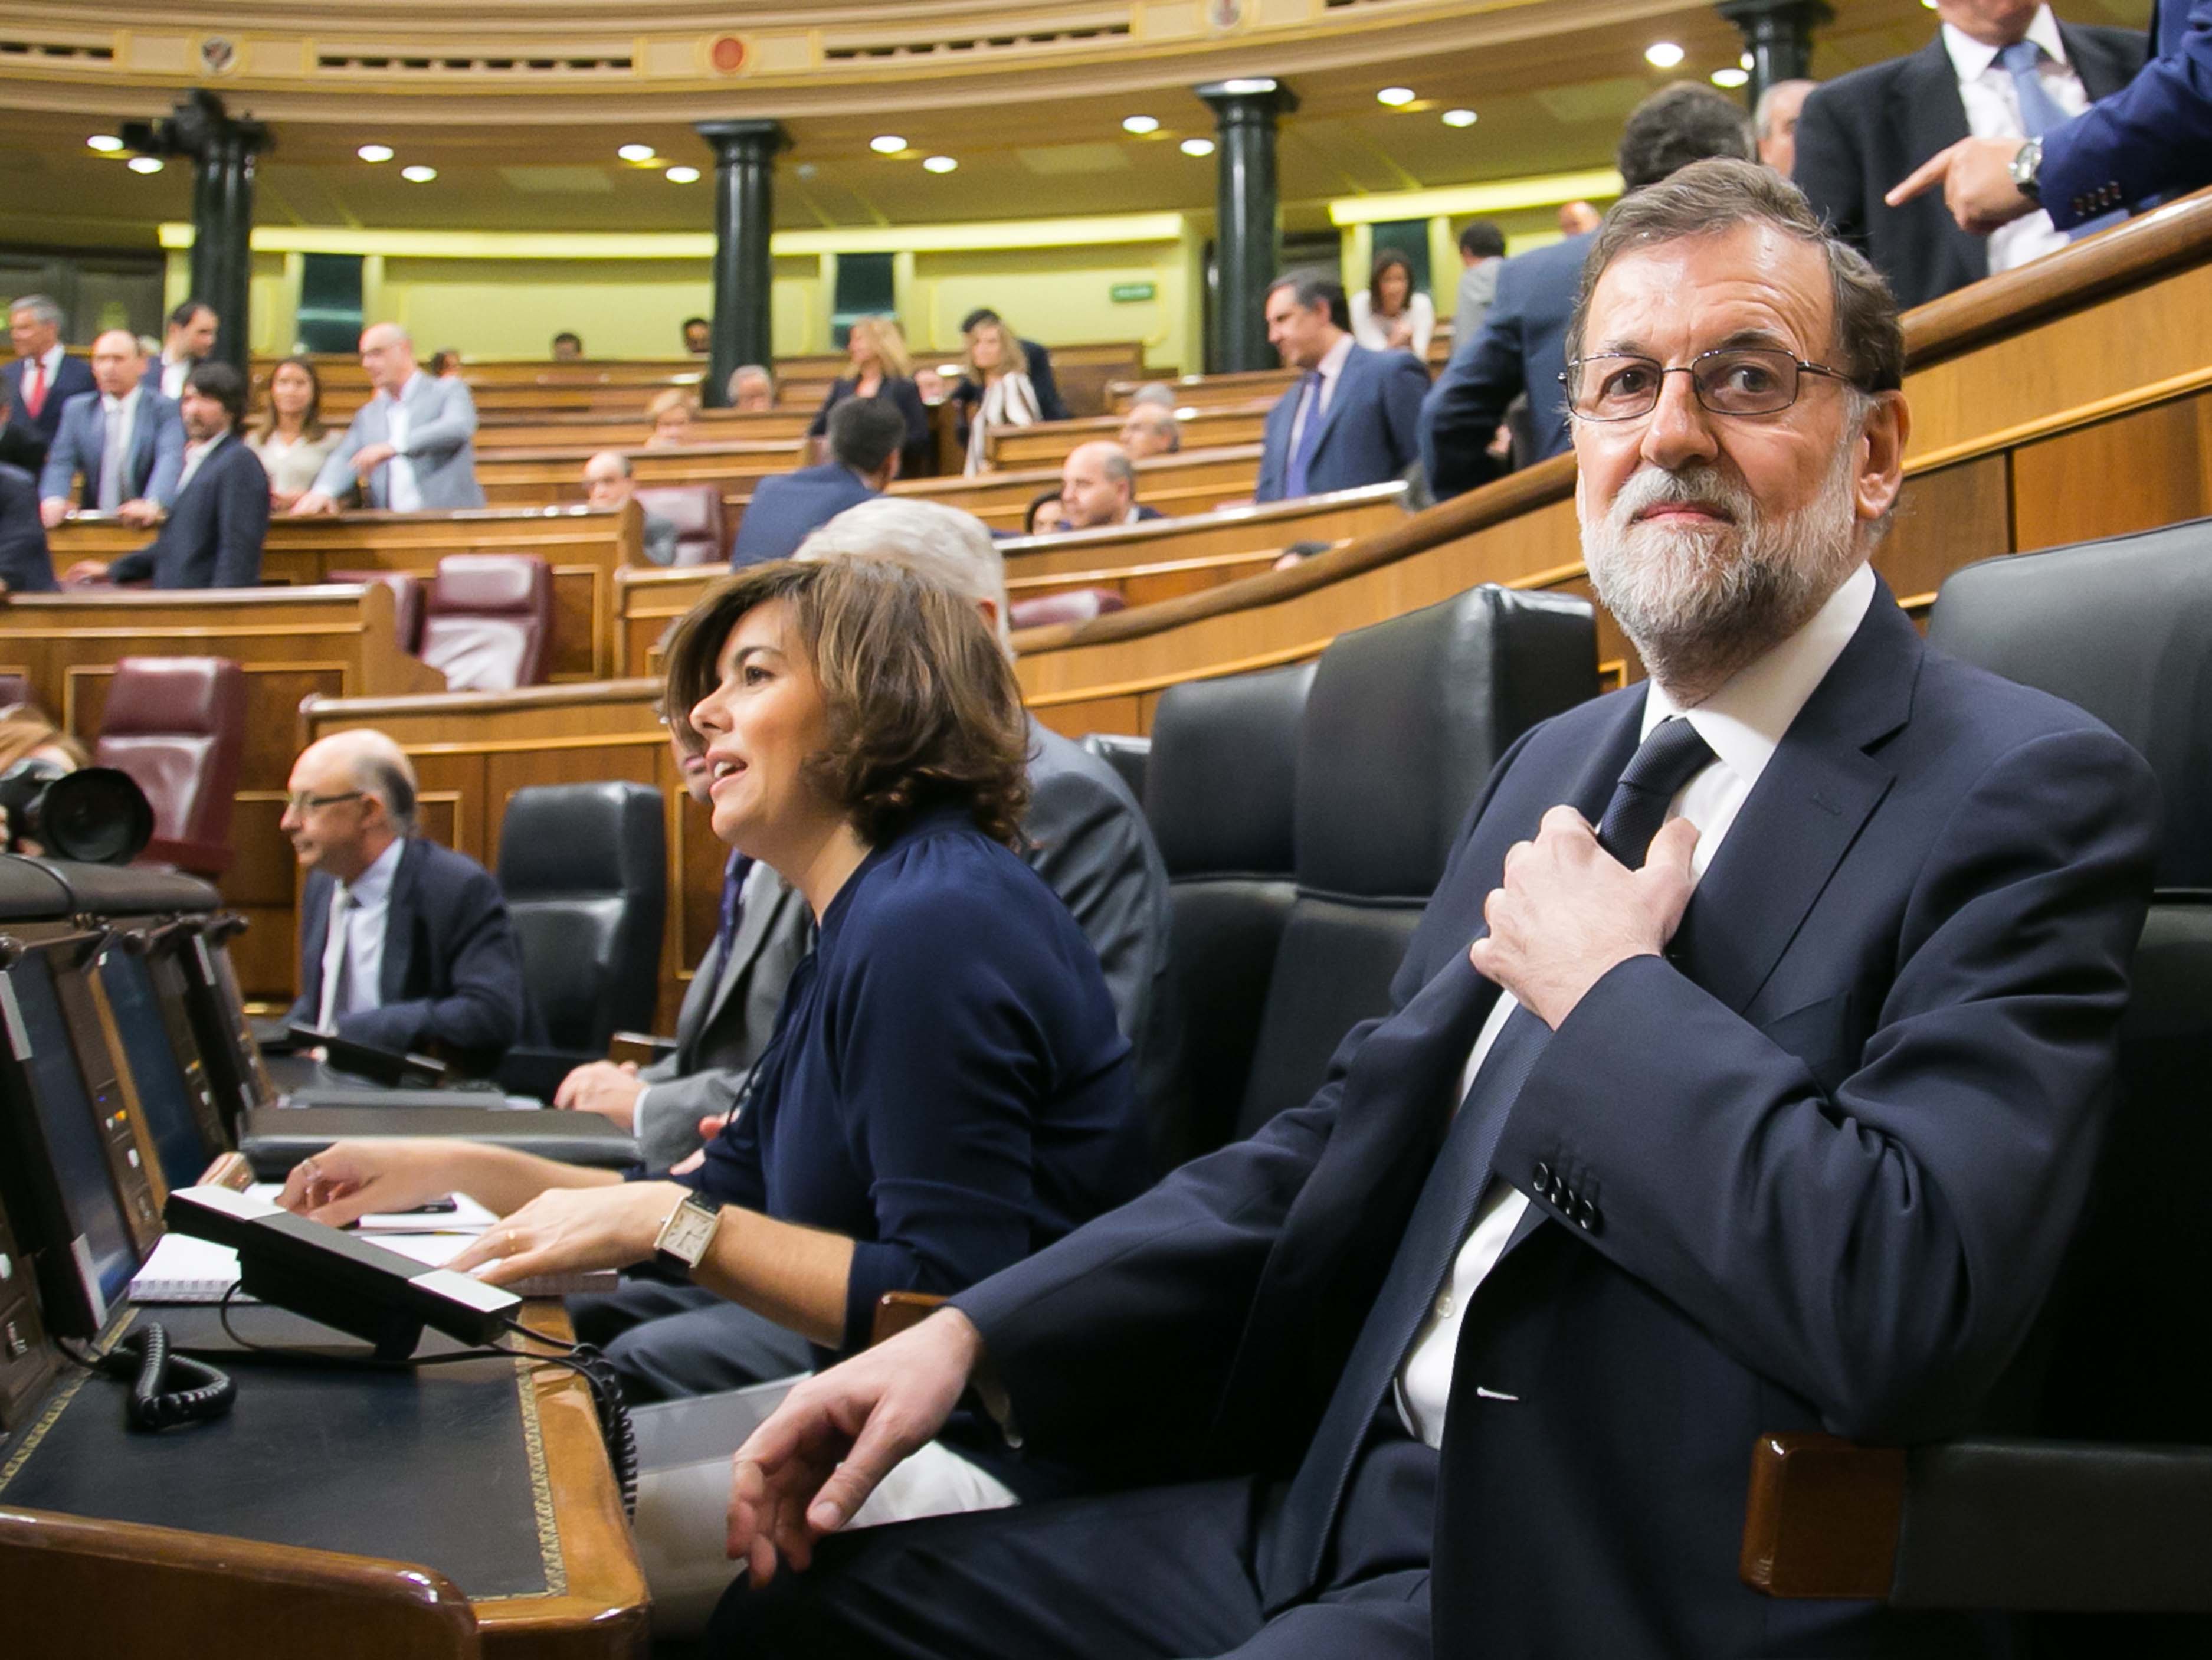 Archive - Rajoy in Spanish Congress (by ACN)